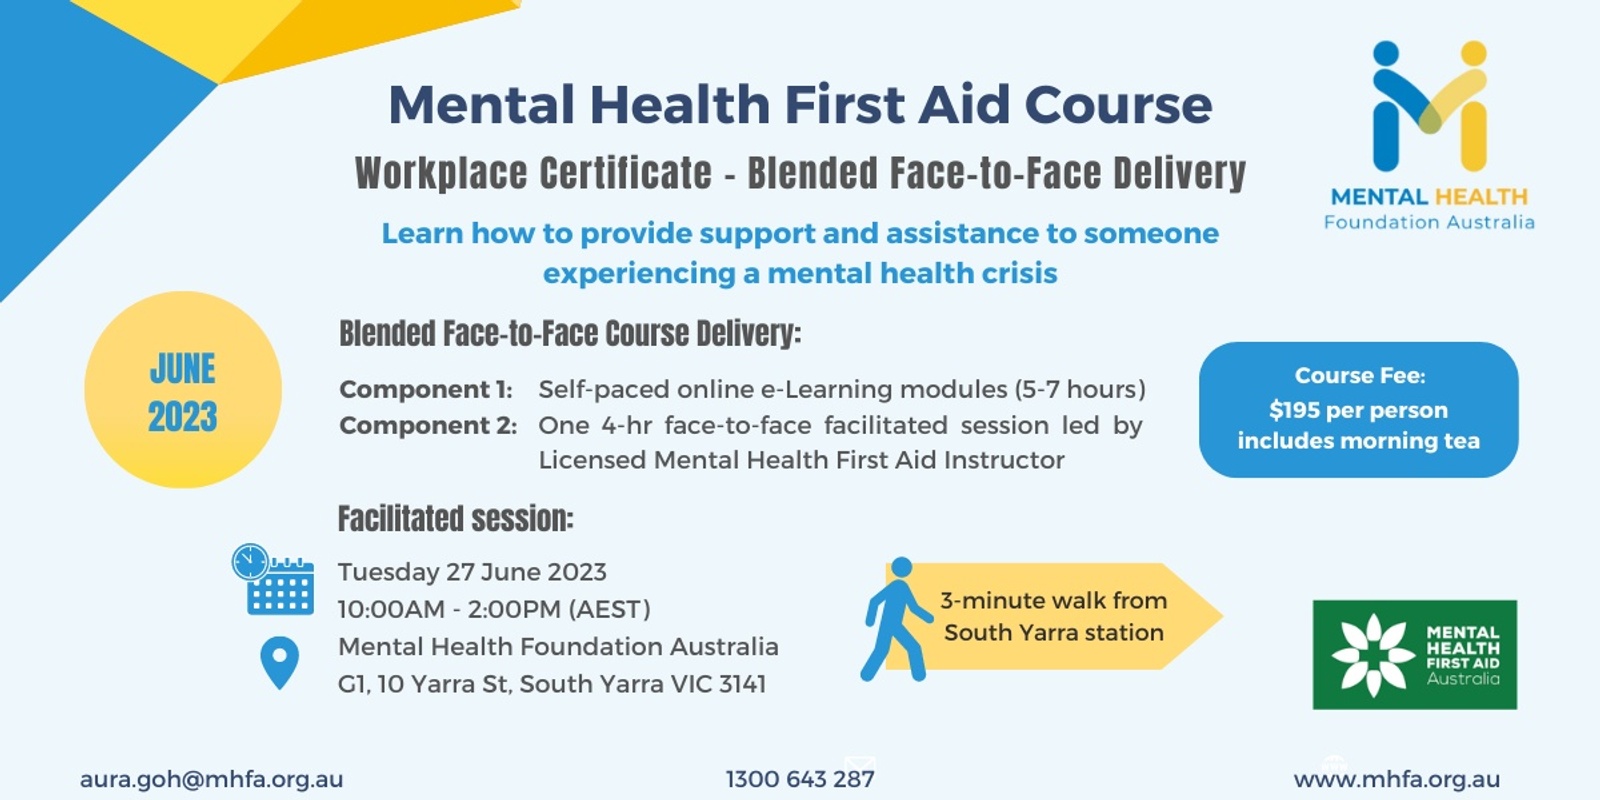 Banner image for Blended Face-to-Face Mental Health First Aid course (Workplace Certificate) - June 2023